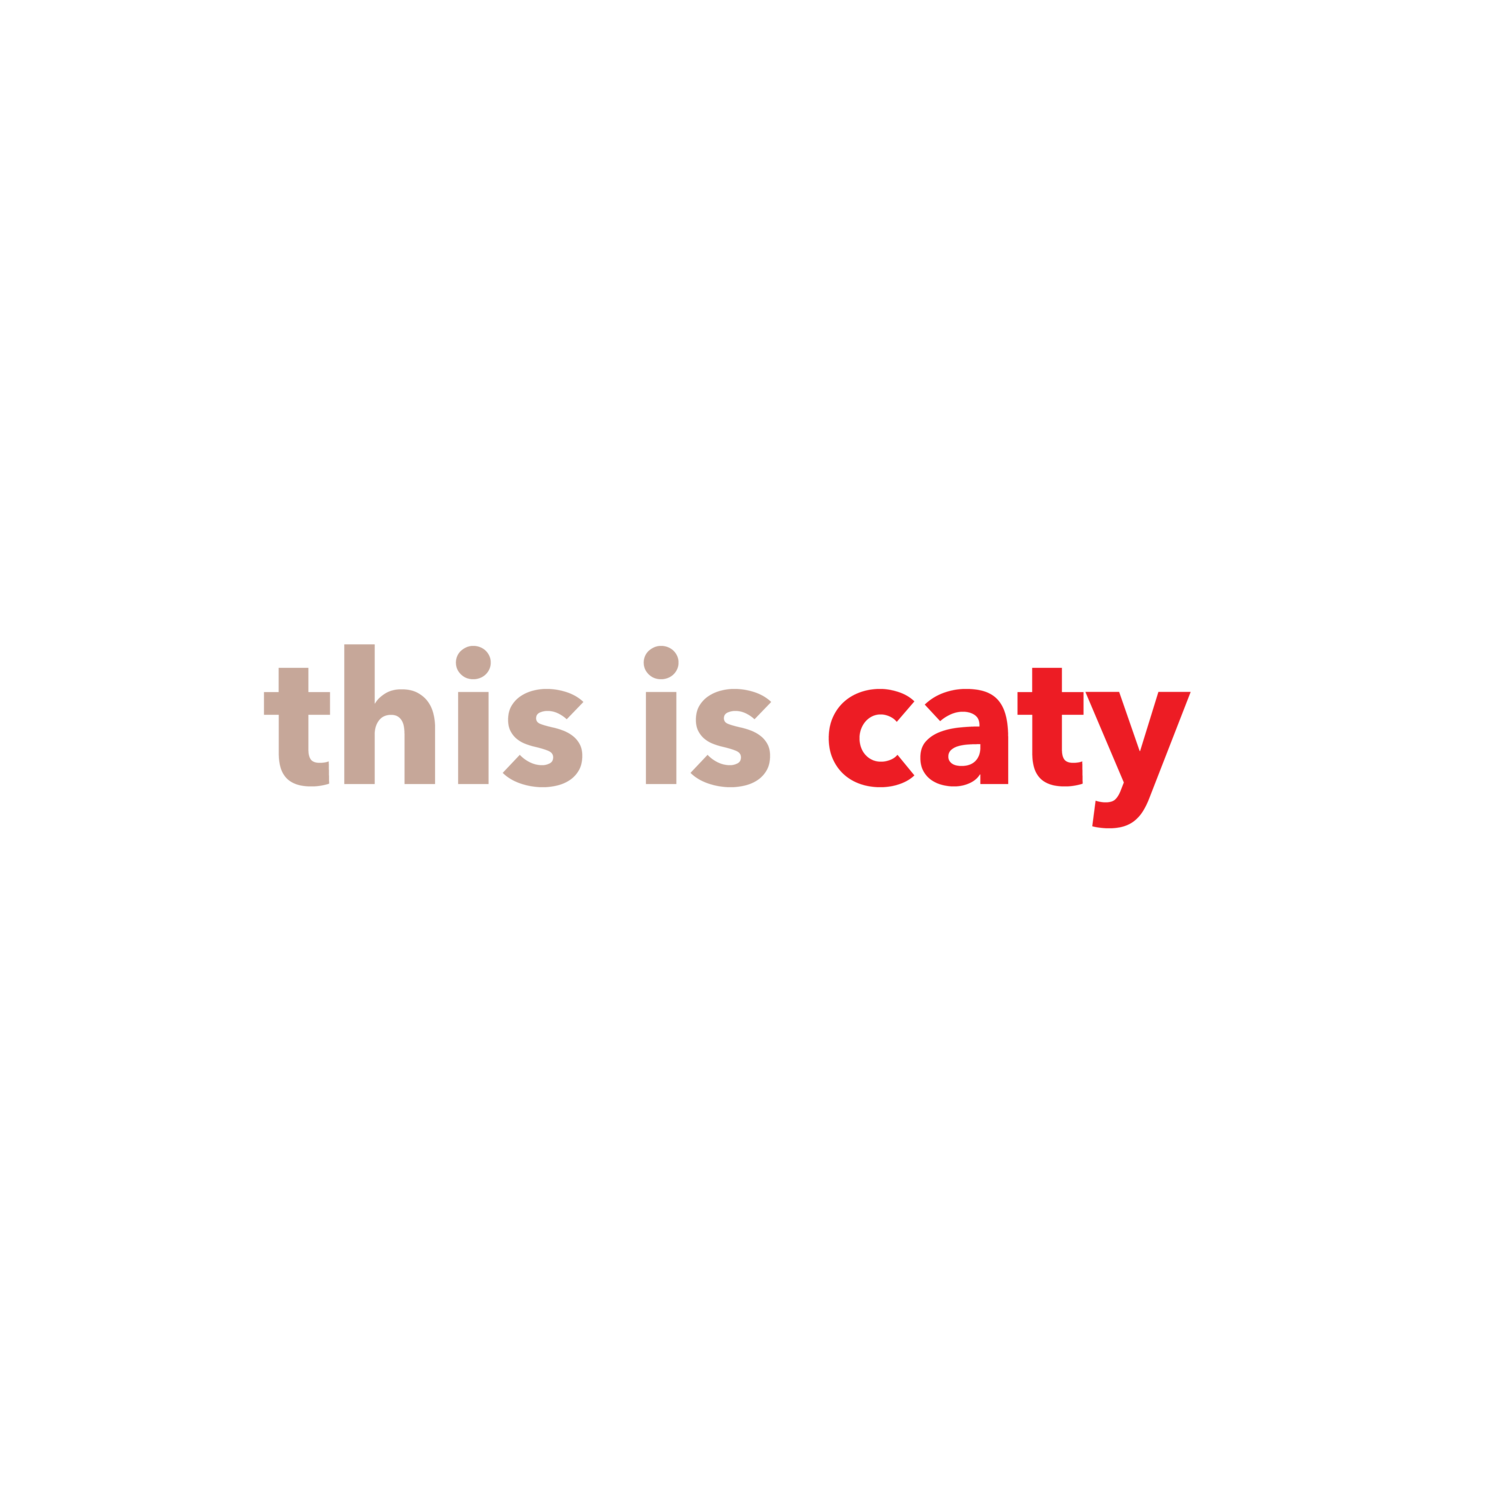 this is caty